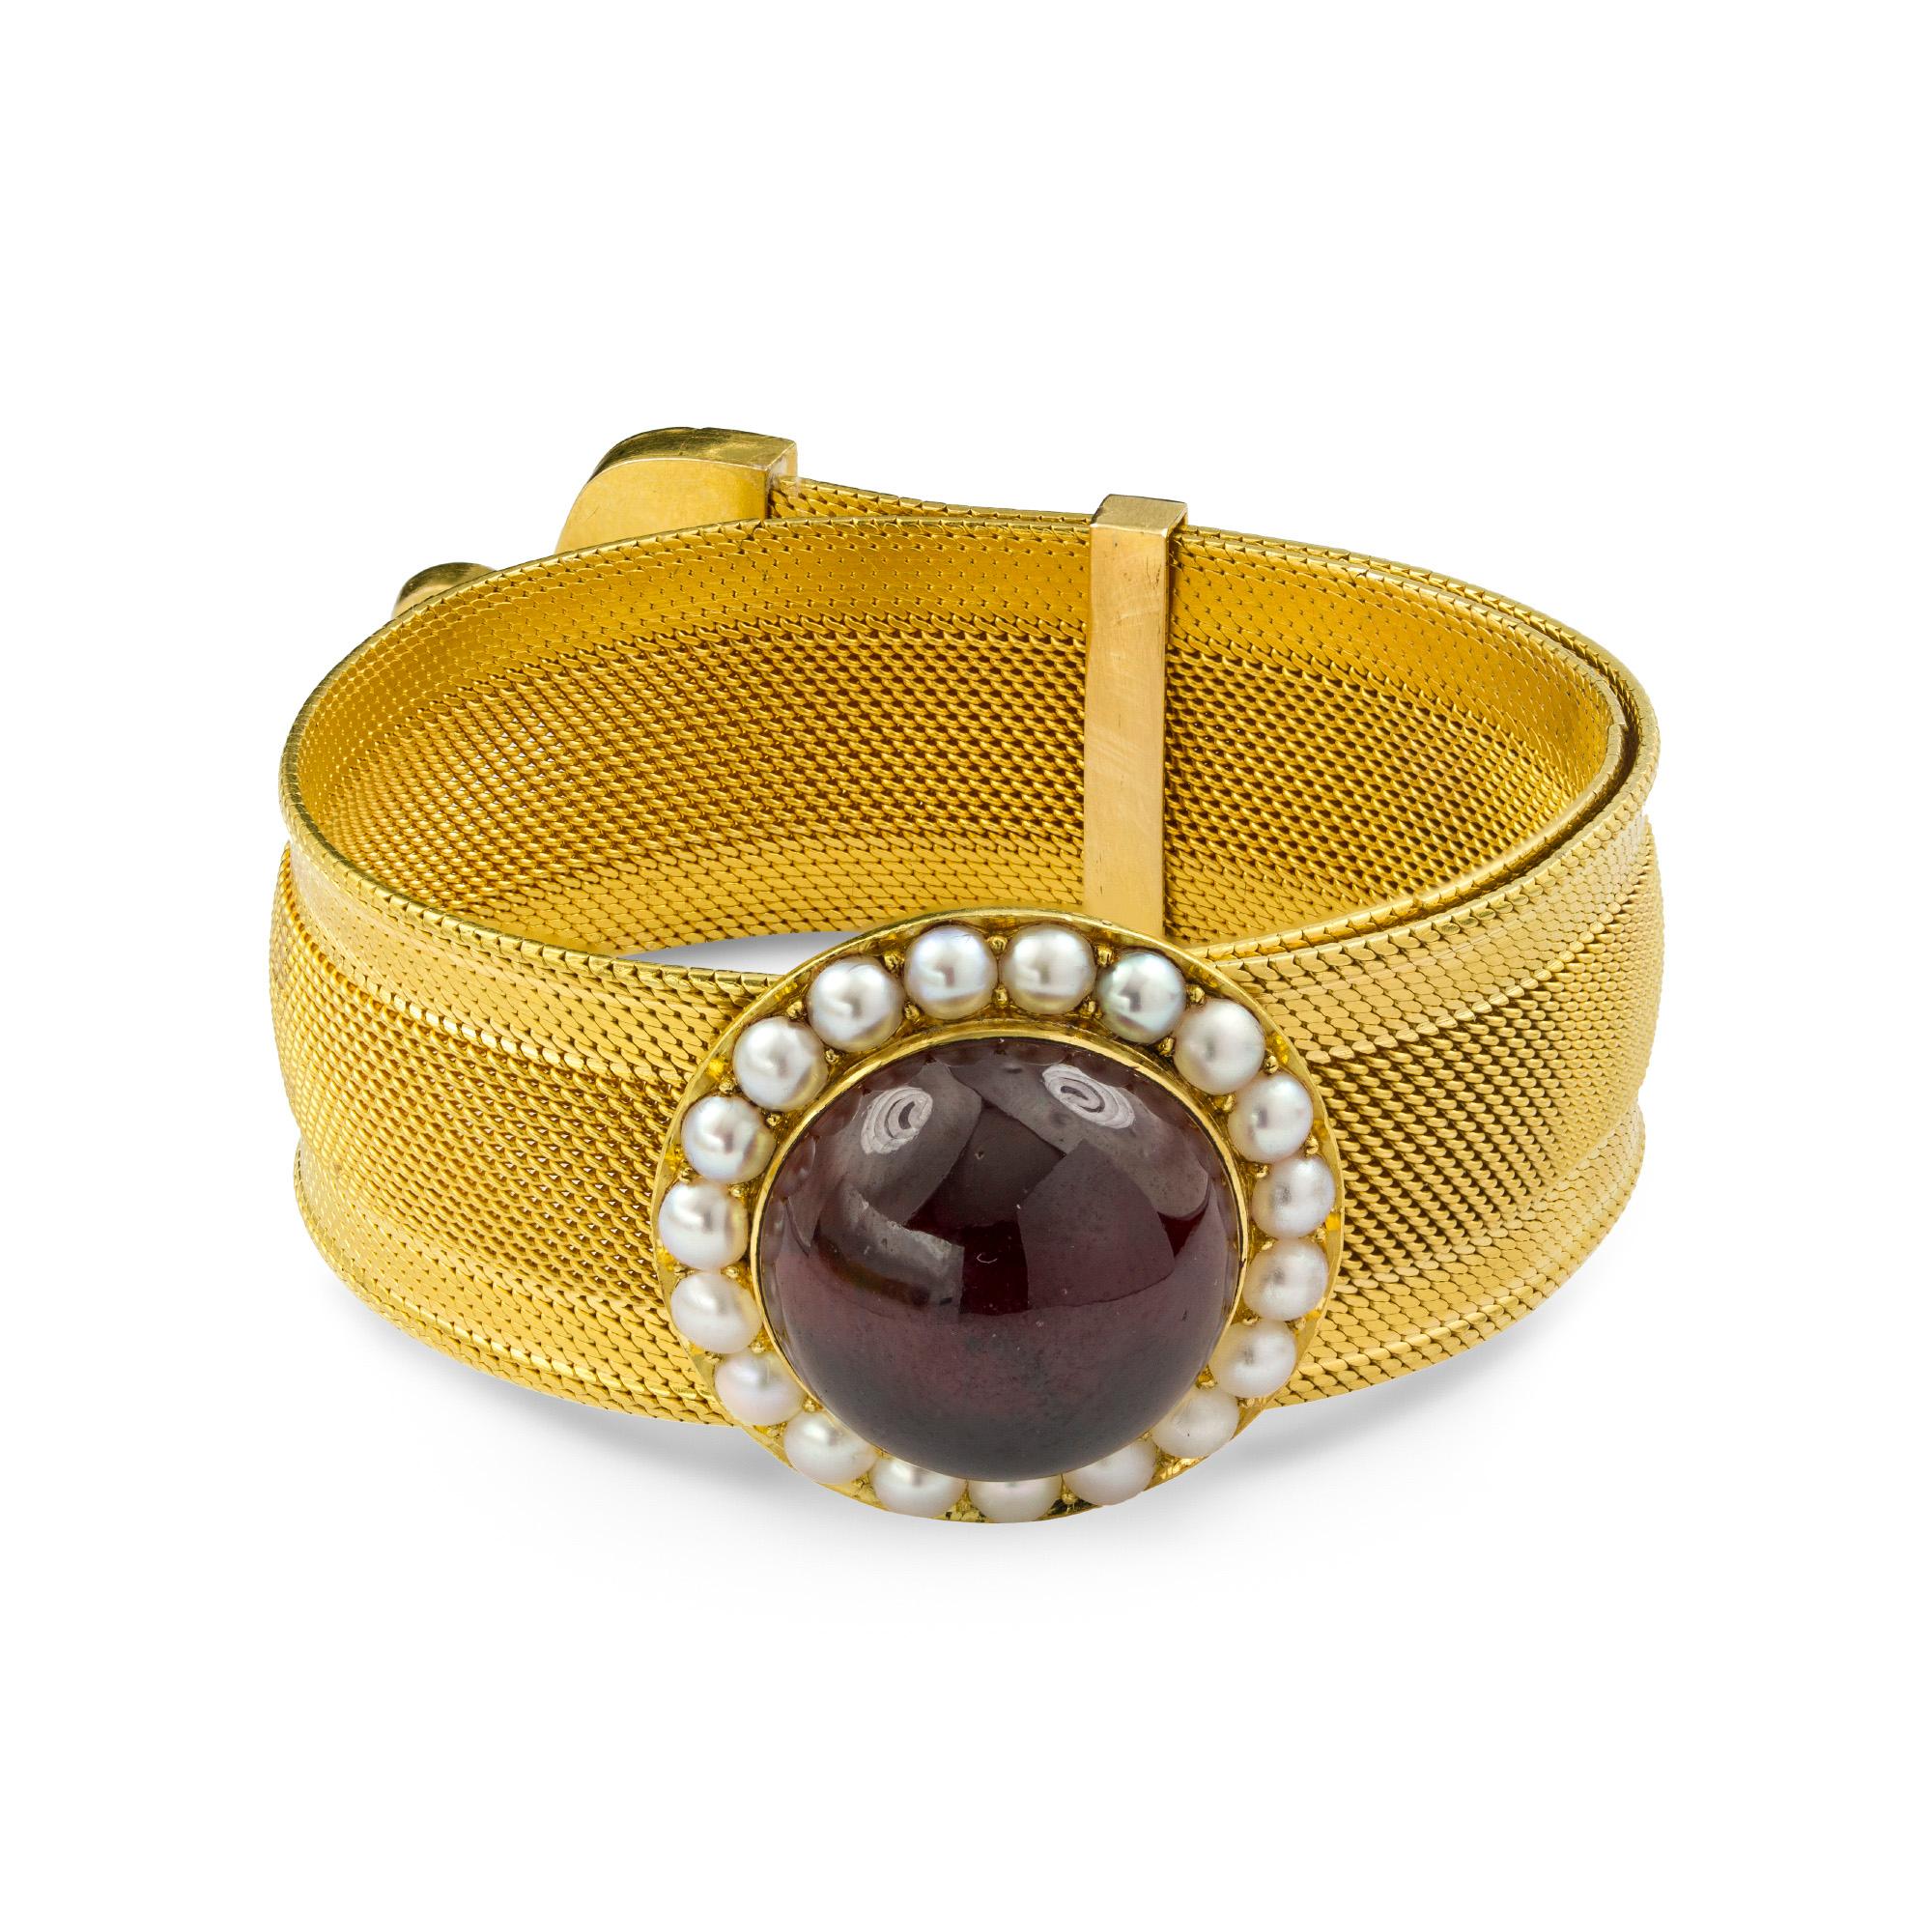 A Victorian garnet and half pearl bracelet, the central slide set with cabochon-cut garnet measuring approximately 17.2mm in diameter, surrounded by nineteen half pearls, on a gold mesh bracelet terminating with a line of half pearls and triangular